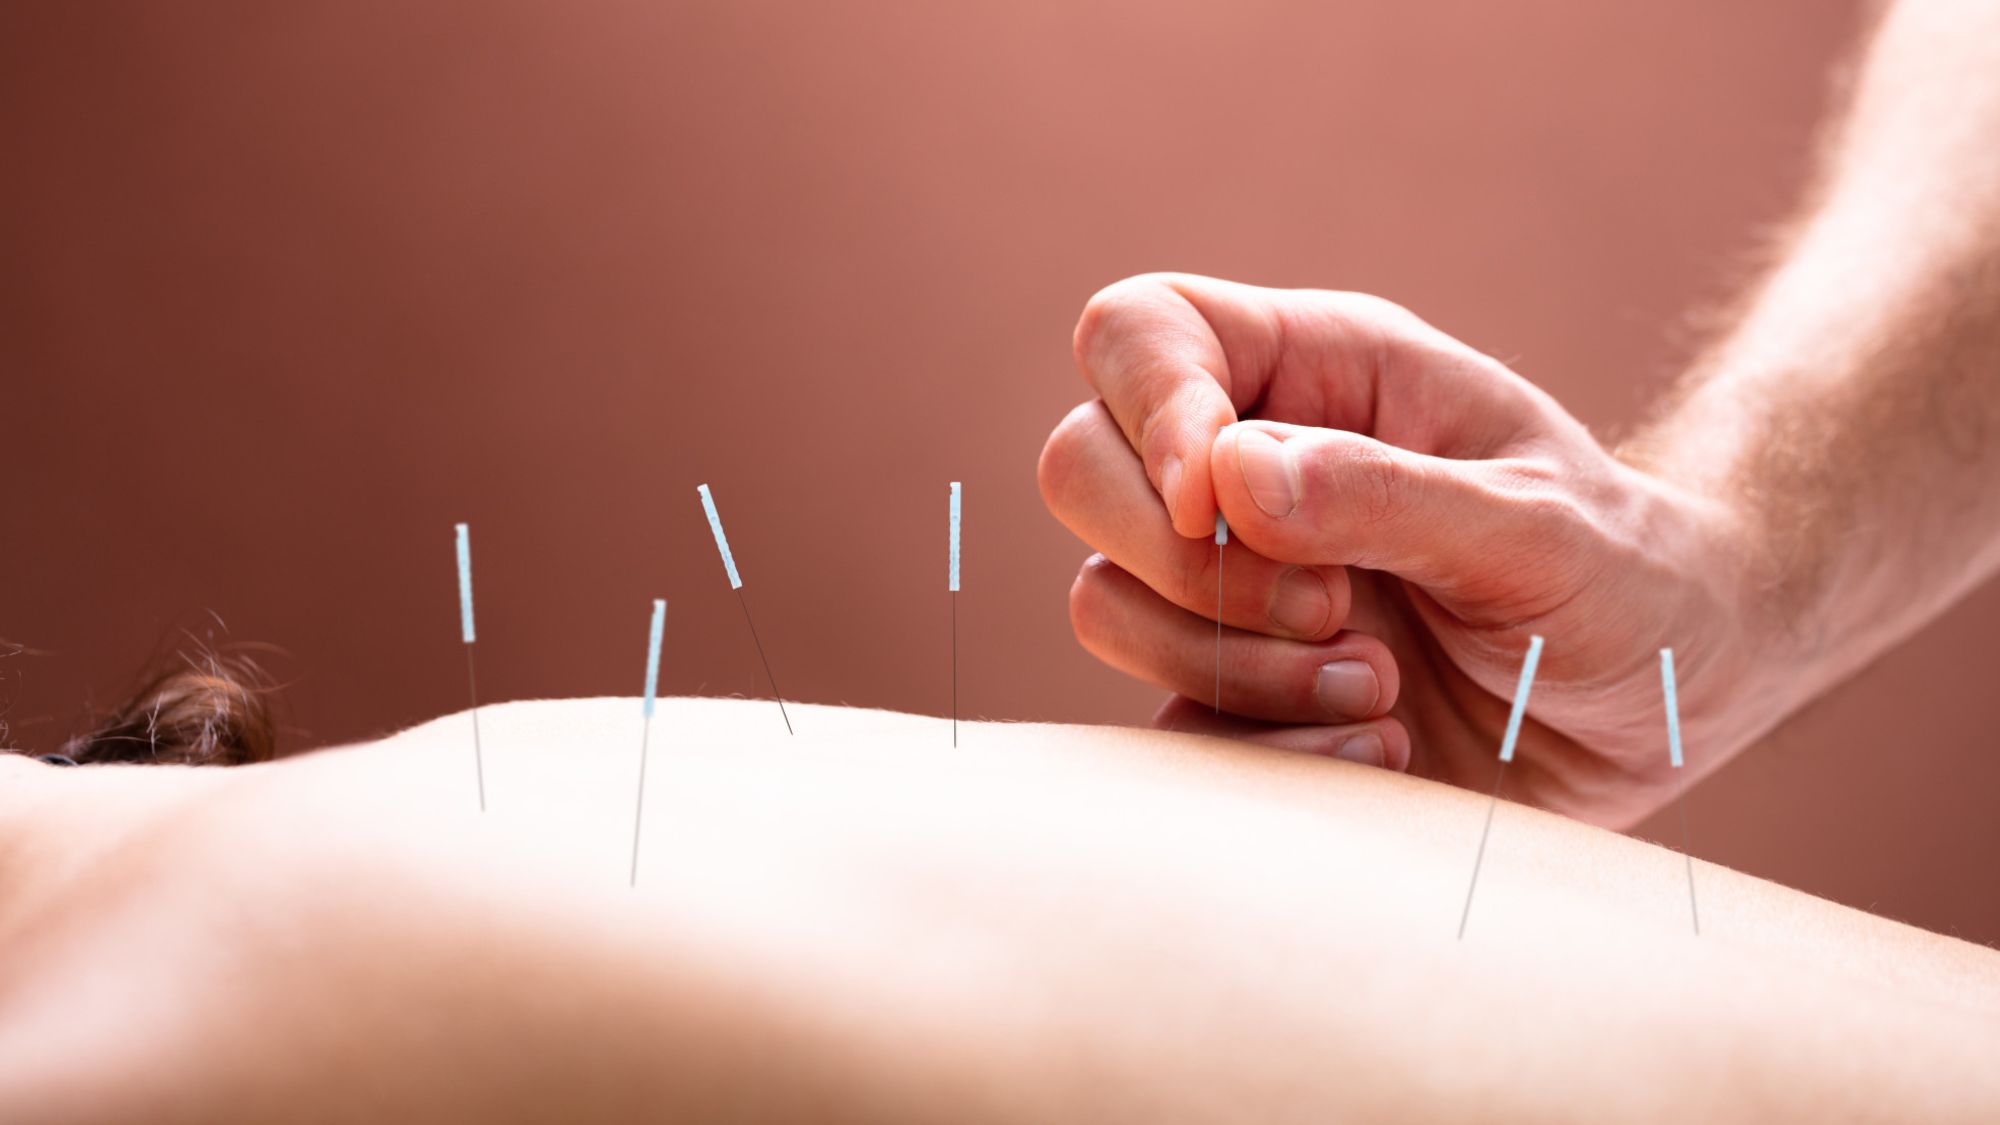 A woman having needle therapy that promotes overall wellness